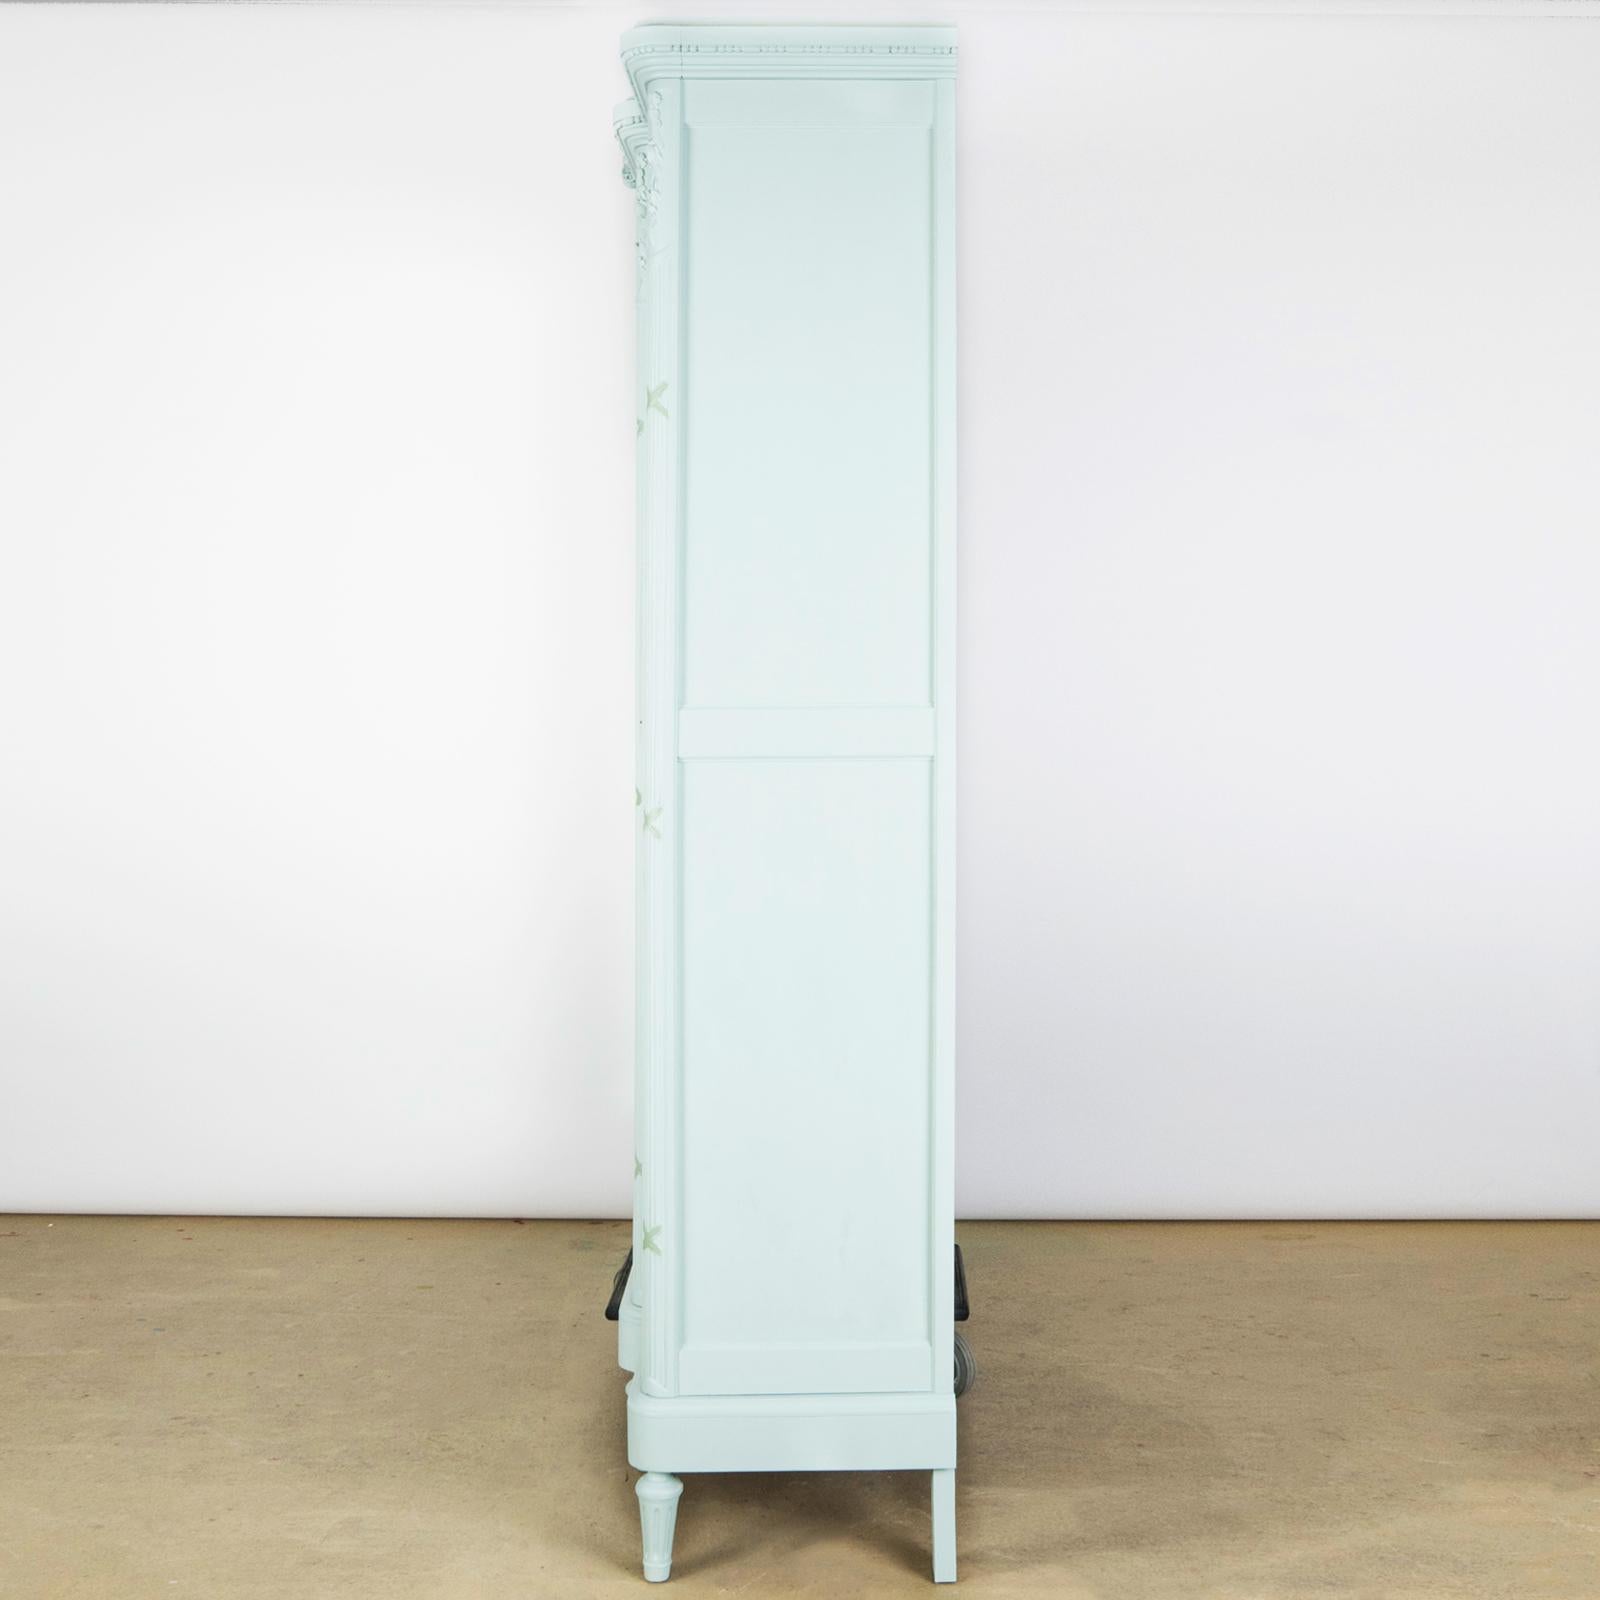 19th Century Antique French Louis XVI Style Painted Triple Door Mirror Armoire or Wardrobe For Sale